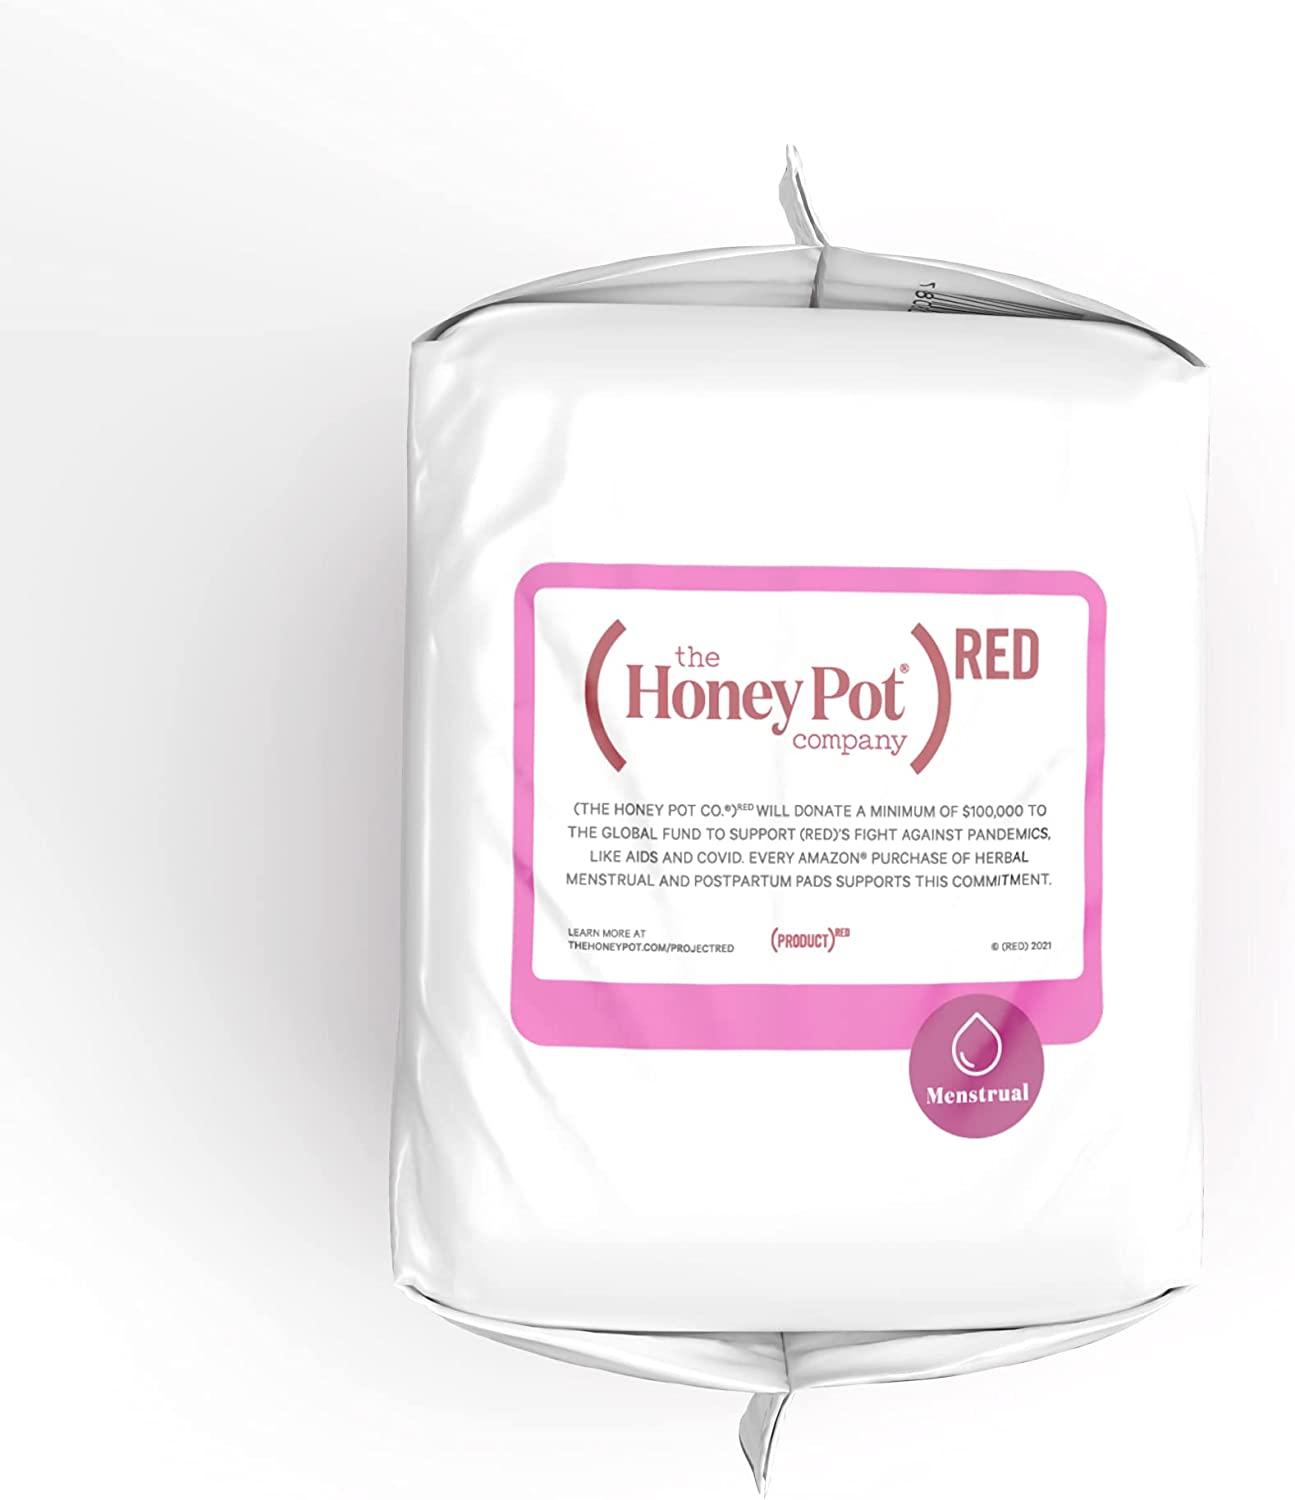 The Honey Pot Regular Herbal Pads with Wings